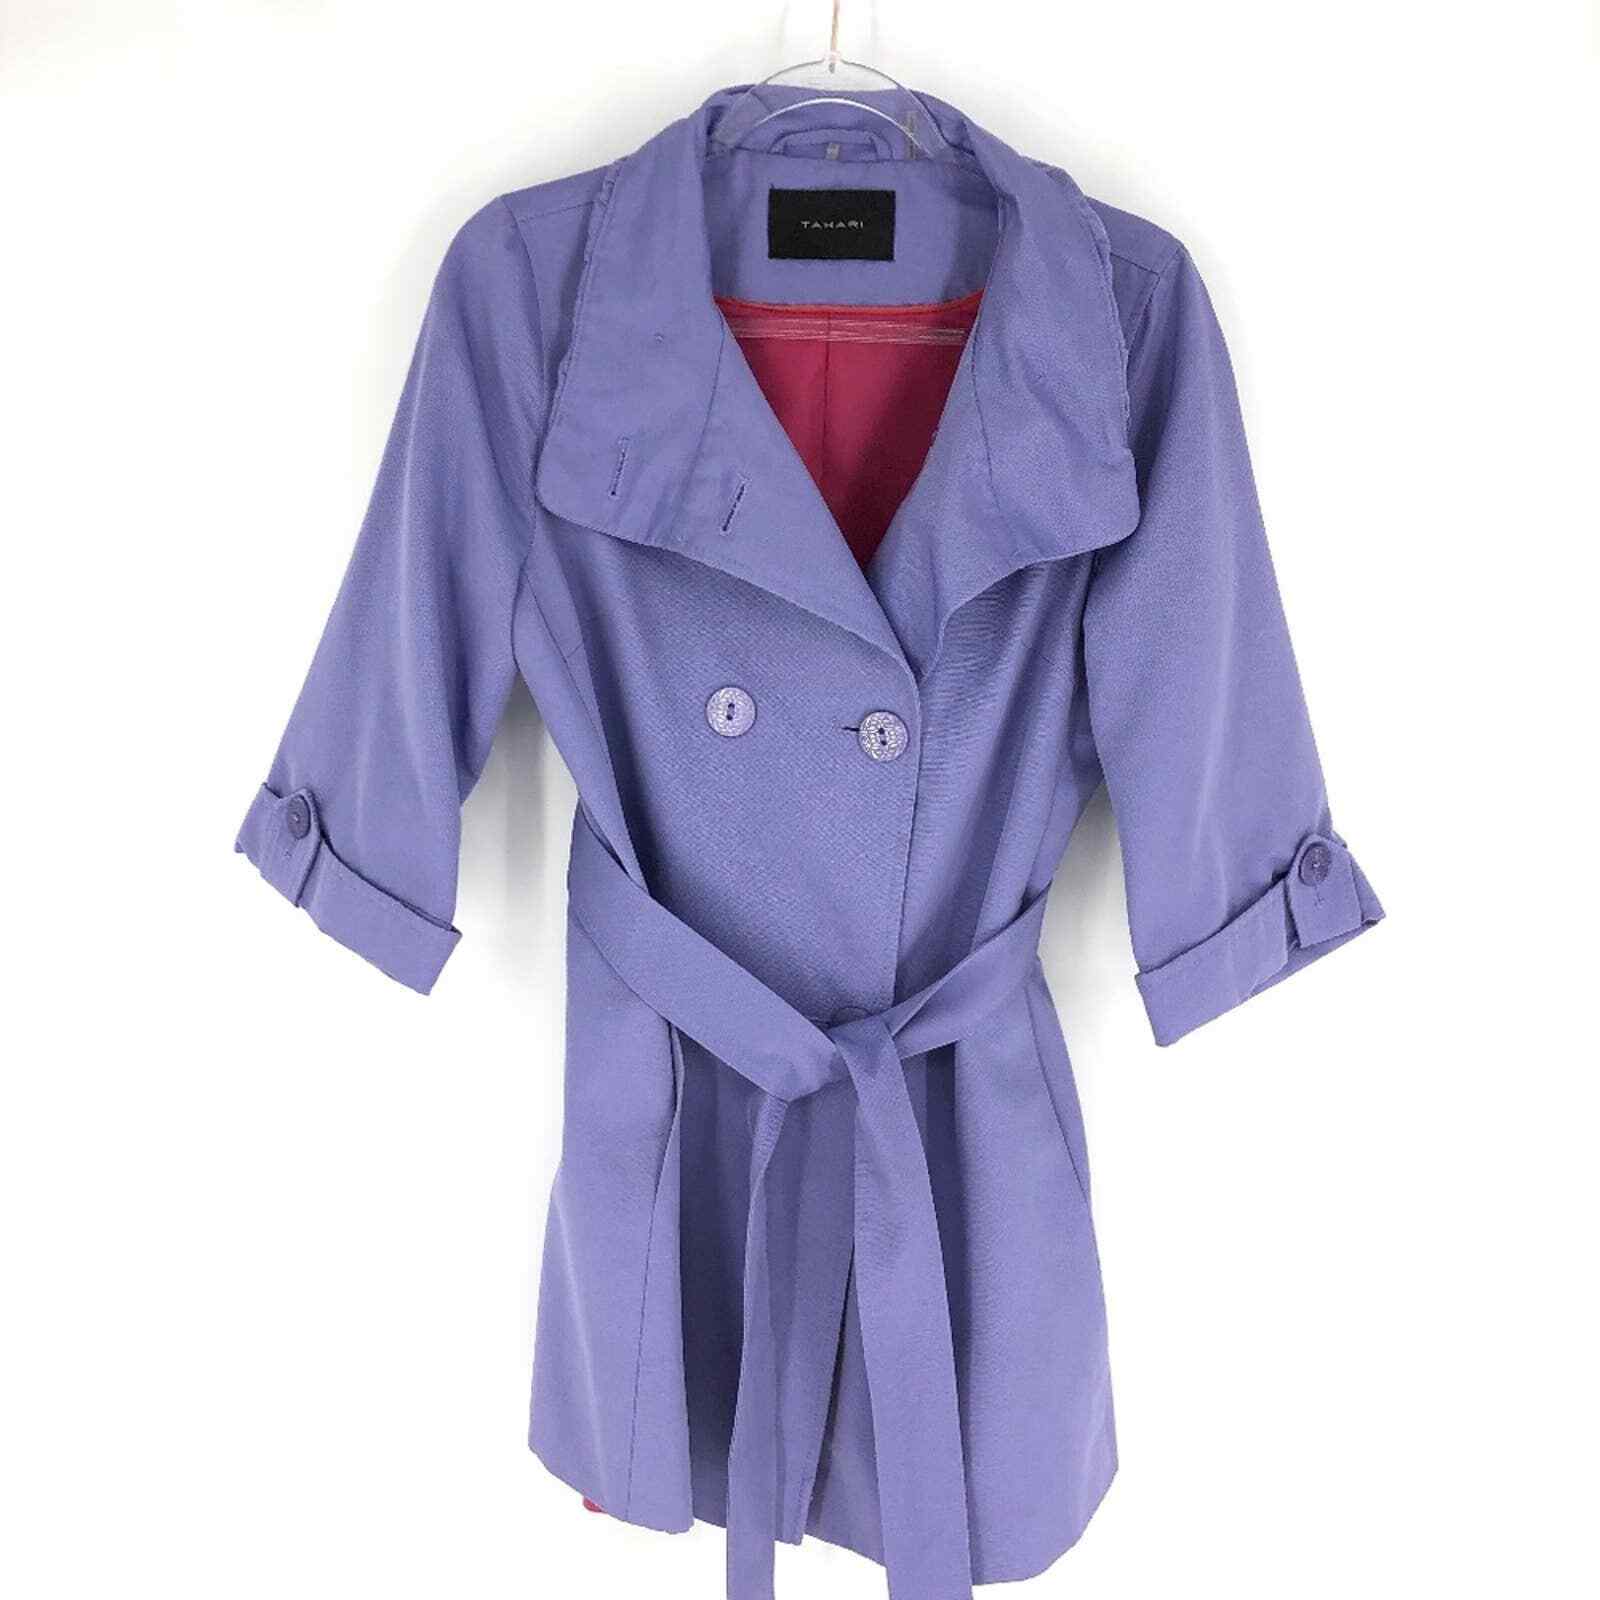 Tahari Lilac Doublebreasted 3/4 Sleeve Belted Coat